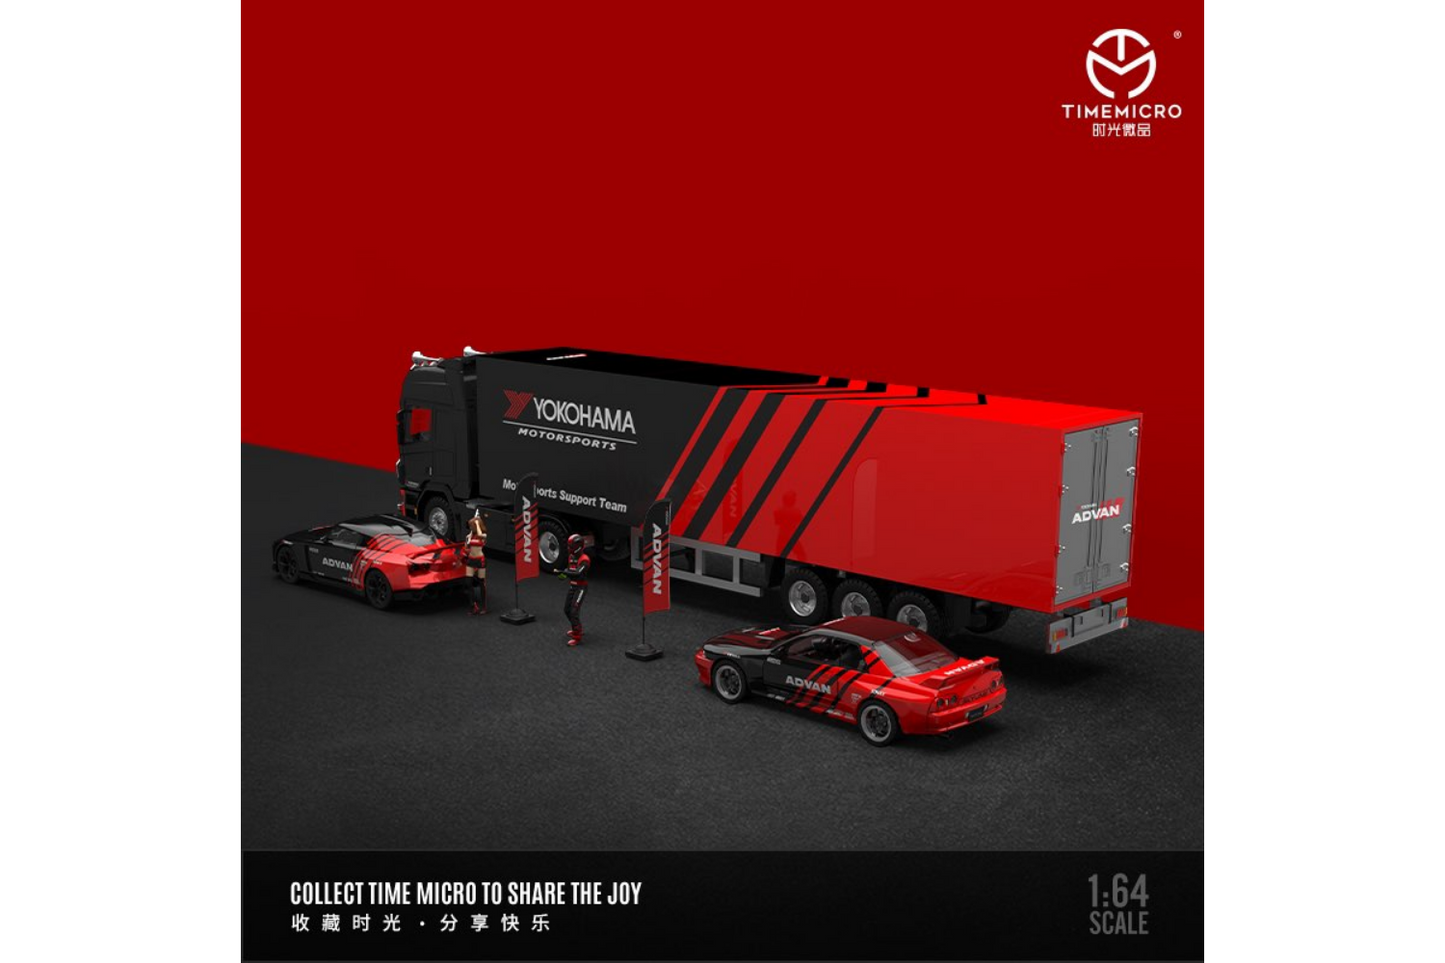 Time Micro 1/64 Advan Nissan GT-R (R32) - Nissan GT-R50 - Scania Container Truck Set